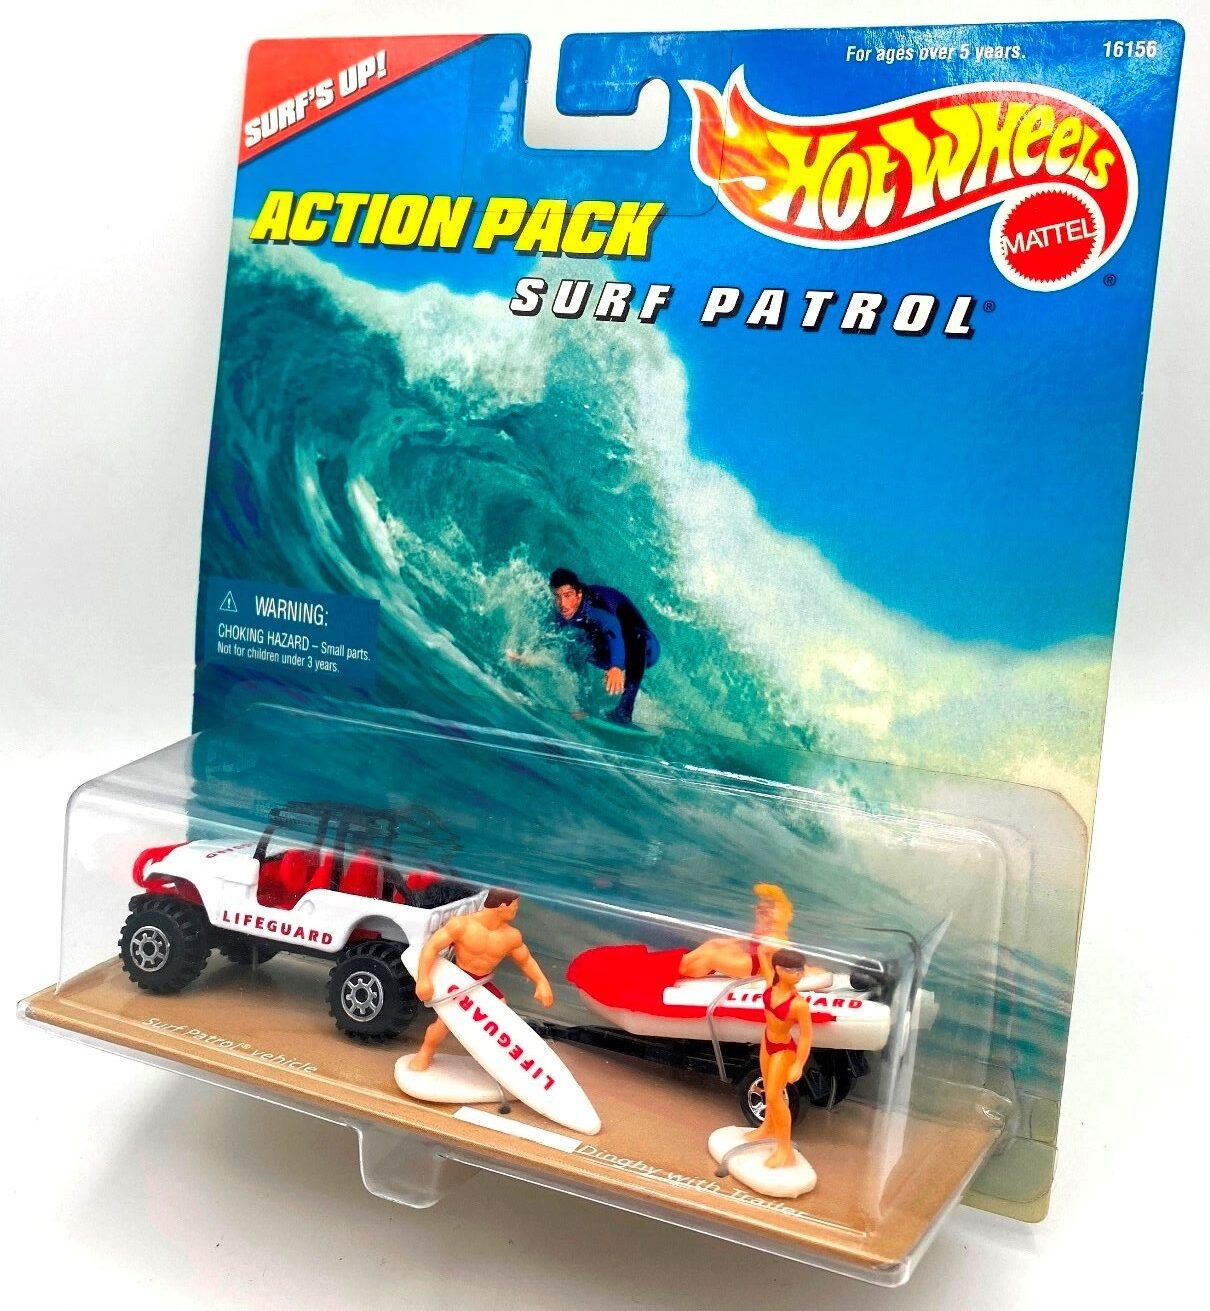 Action Pack (Surf Patrol) “SURF'S UP!” (Hotwheels-Multiple Pack Set 1:64  Scale) “Rare-Vintage” (1996) » Now And Then Collectibles